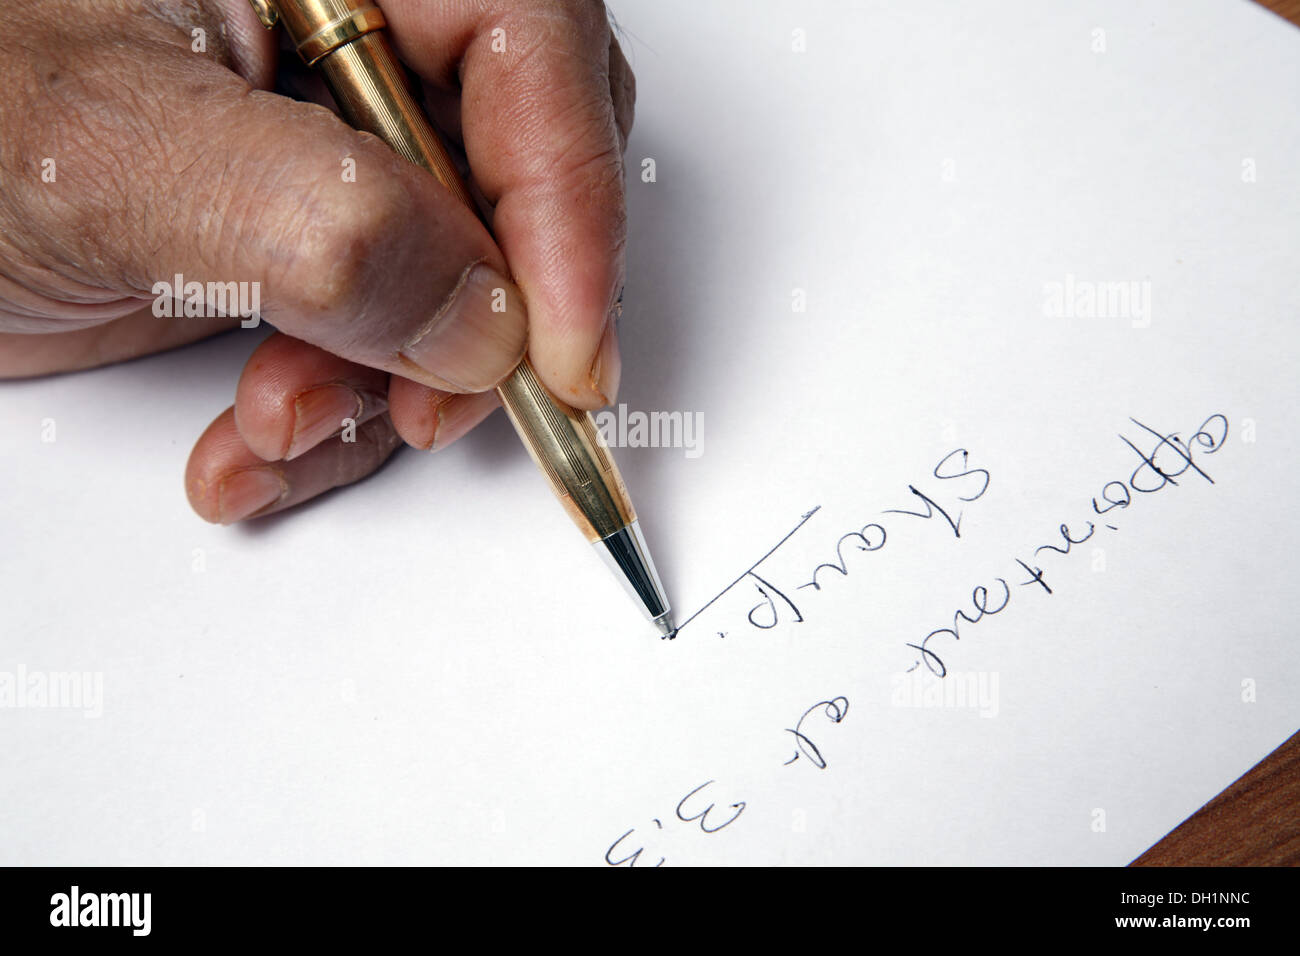 Young man writing on white paper with golden ball point pen Close up of hand pen and paper   MR#743AD Stock Photo